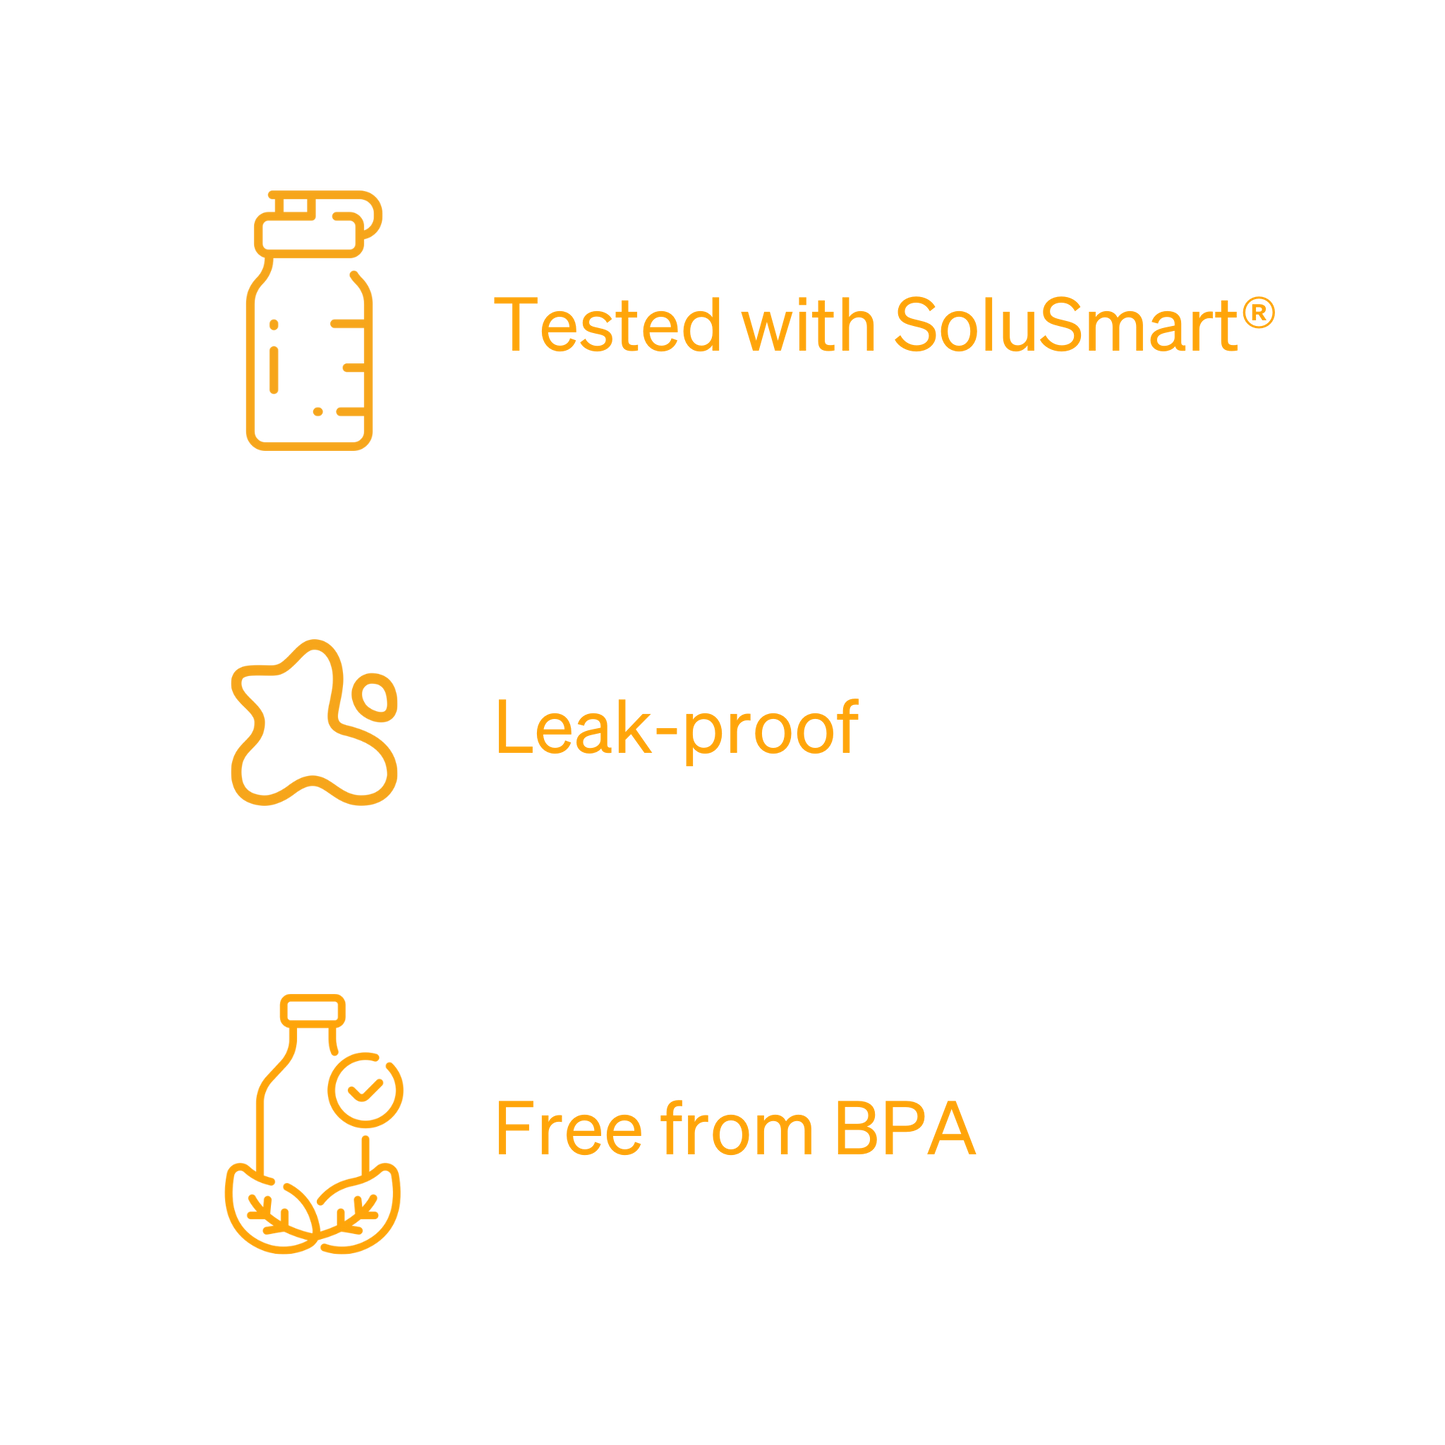 features of the iüLabs water bottle, leak proof, free from BPA and tested with SoluSmart®